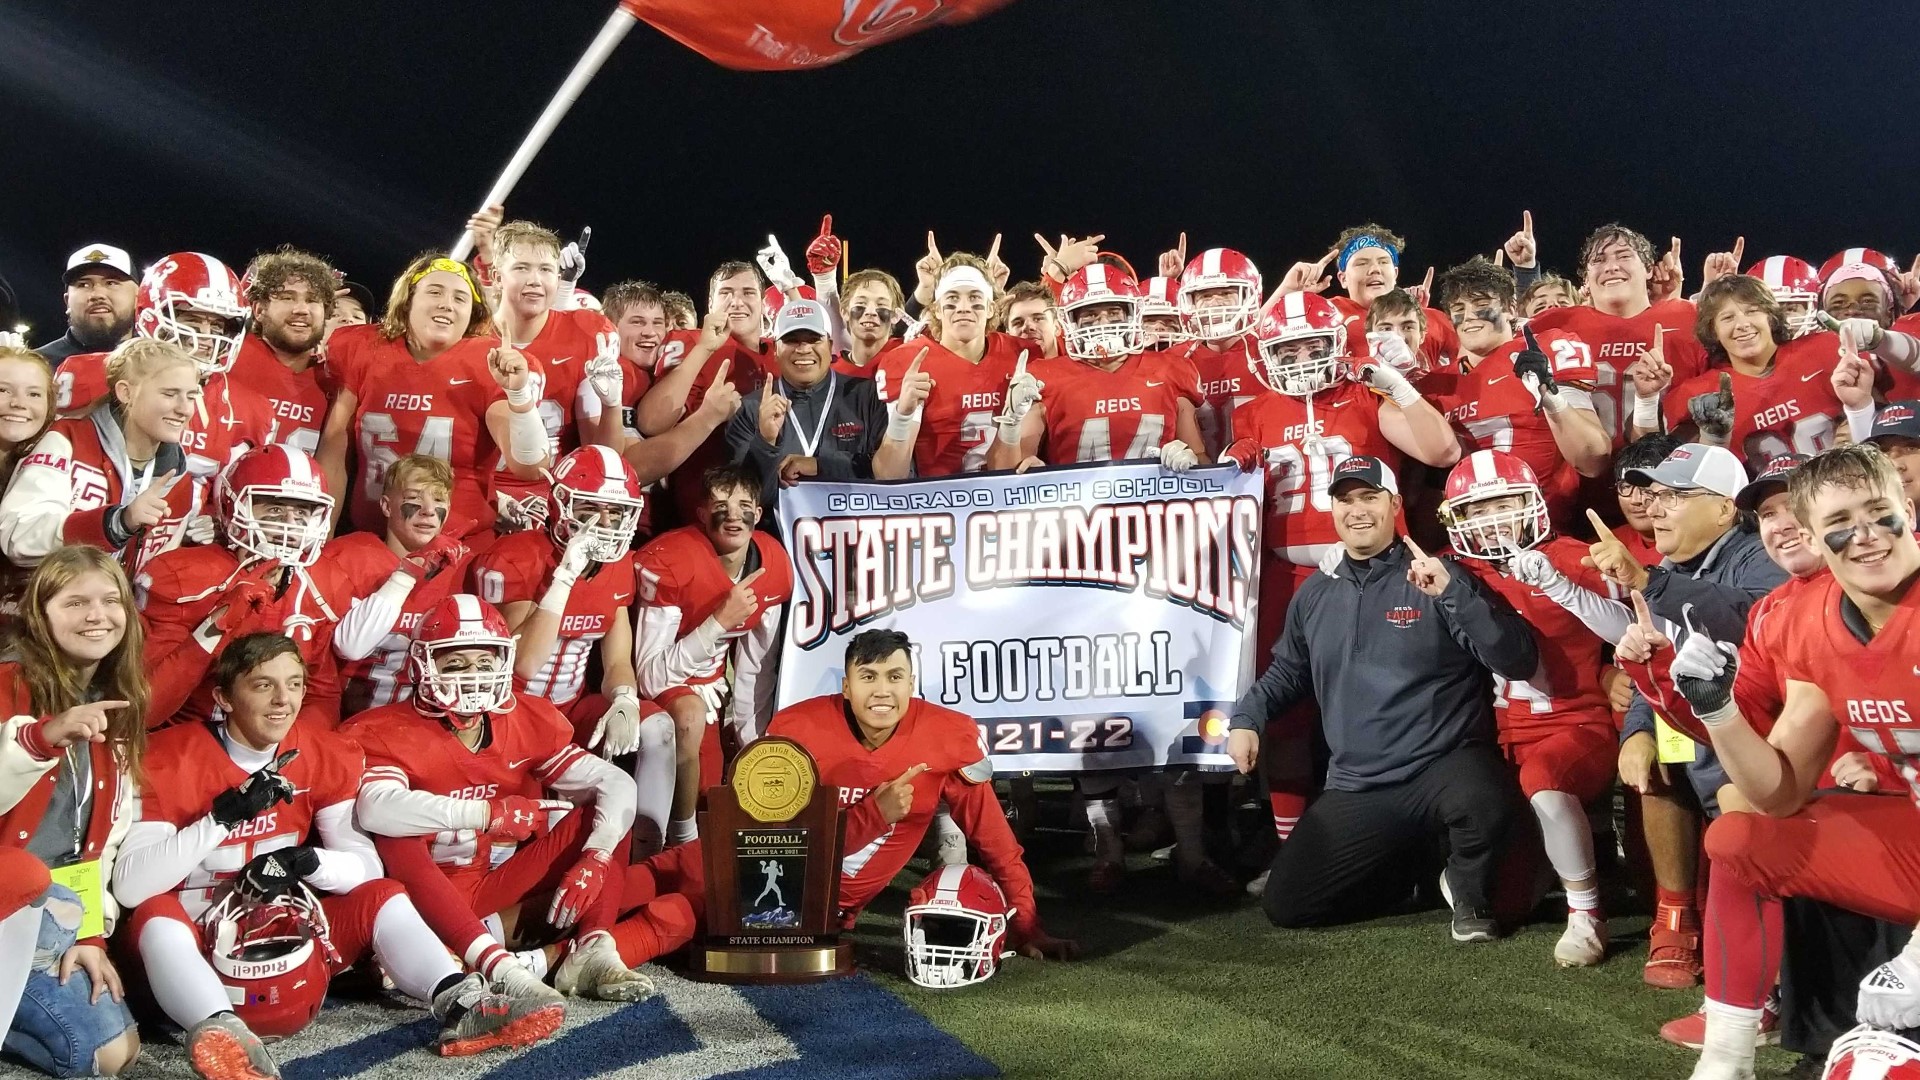 The Reds capped off their undefeated season with a win over Brush in the Class 2A state championship game.